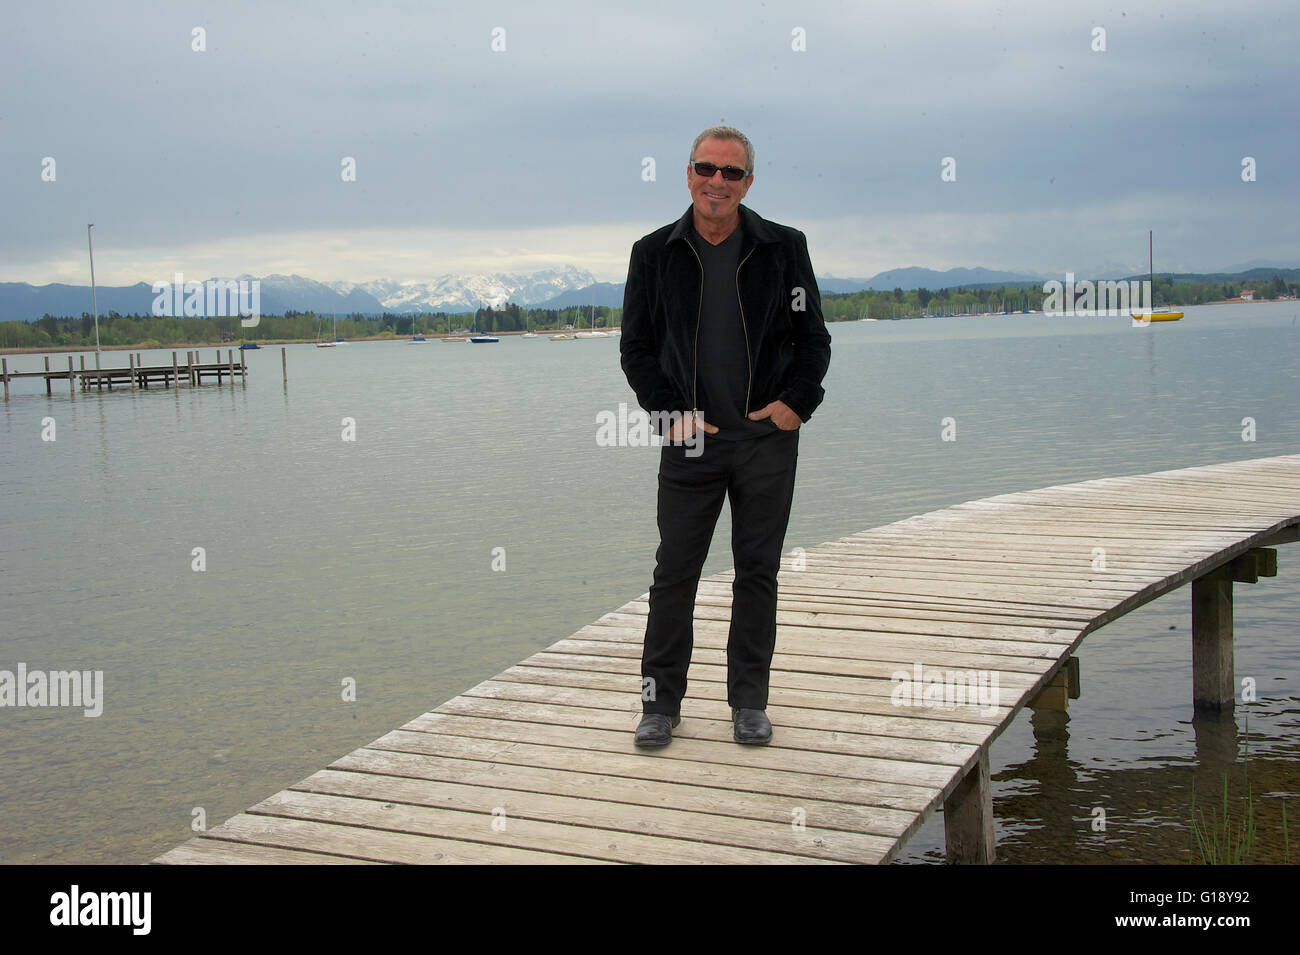 Seeshaupt, Germany. 10th May, 2016. dpa EXCLUSIVE - Tico Torres, drummer of Bon Jovi, stands on a jetty after a presentation of his 'Rock Star Baby' fashion collection at the Lupaco Concept Store in Seeshaupt, Germany, 10 May 2016. Photo: Ursula Dueren/dpa/Alamy Live News Stock Photo